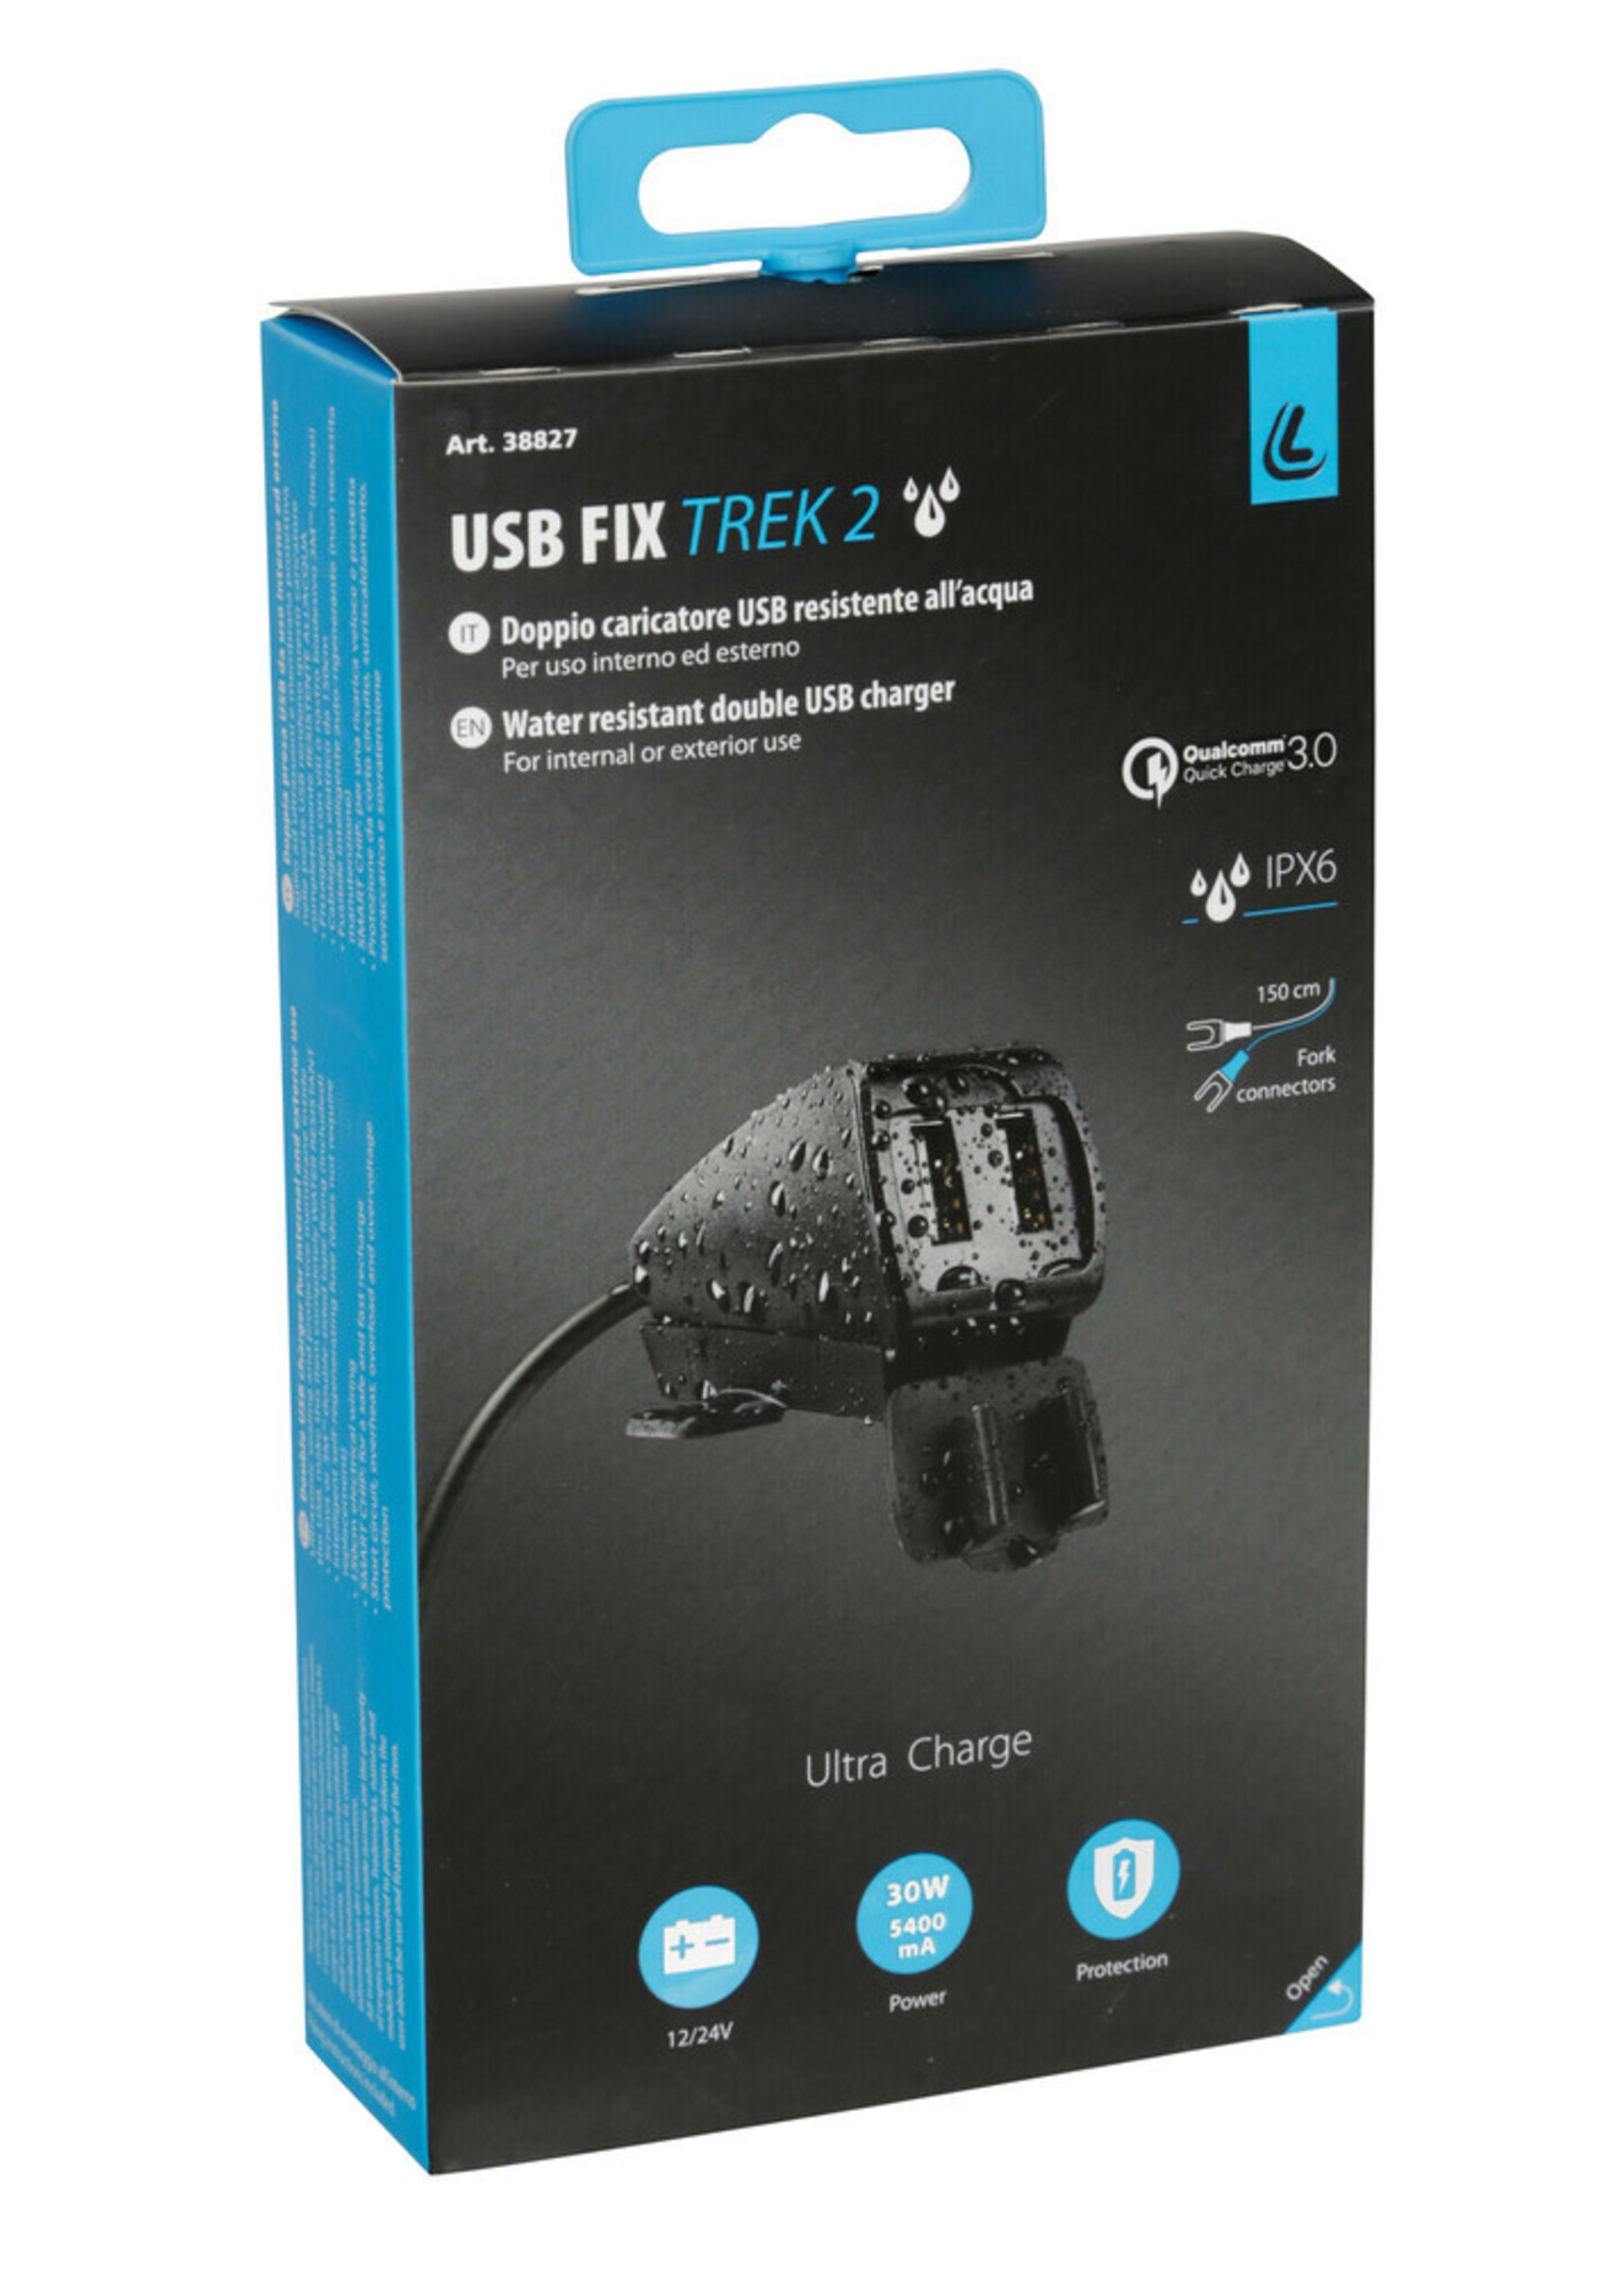 Optiline Usb-Fix Trek 2, rainproof double usb charger, screws or double-sided tape fixing - Ultra Fast Charge - 5400 mA - 12/24V